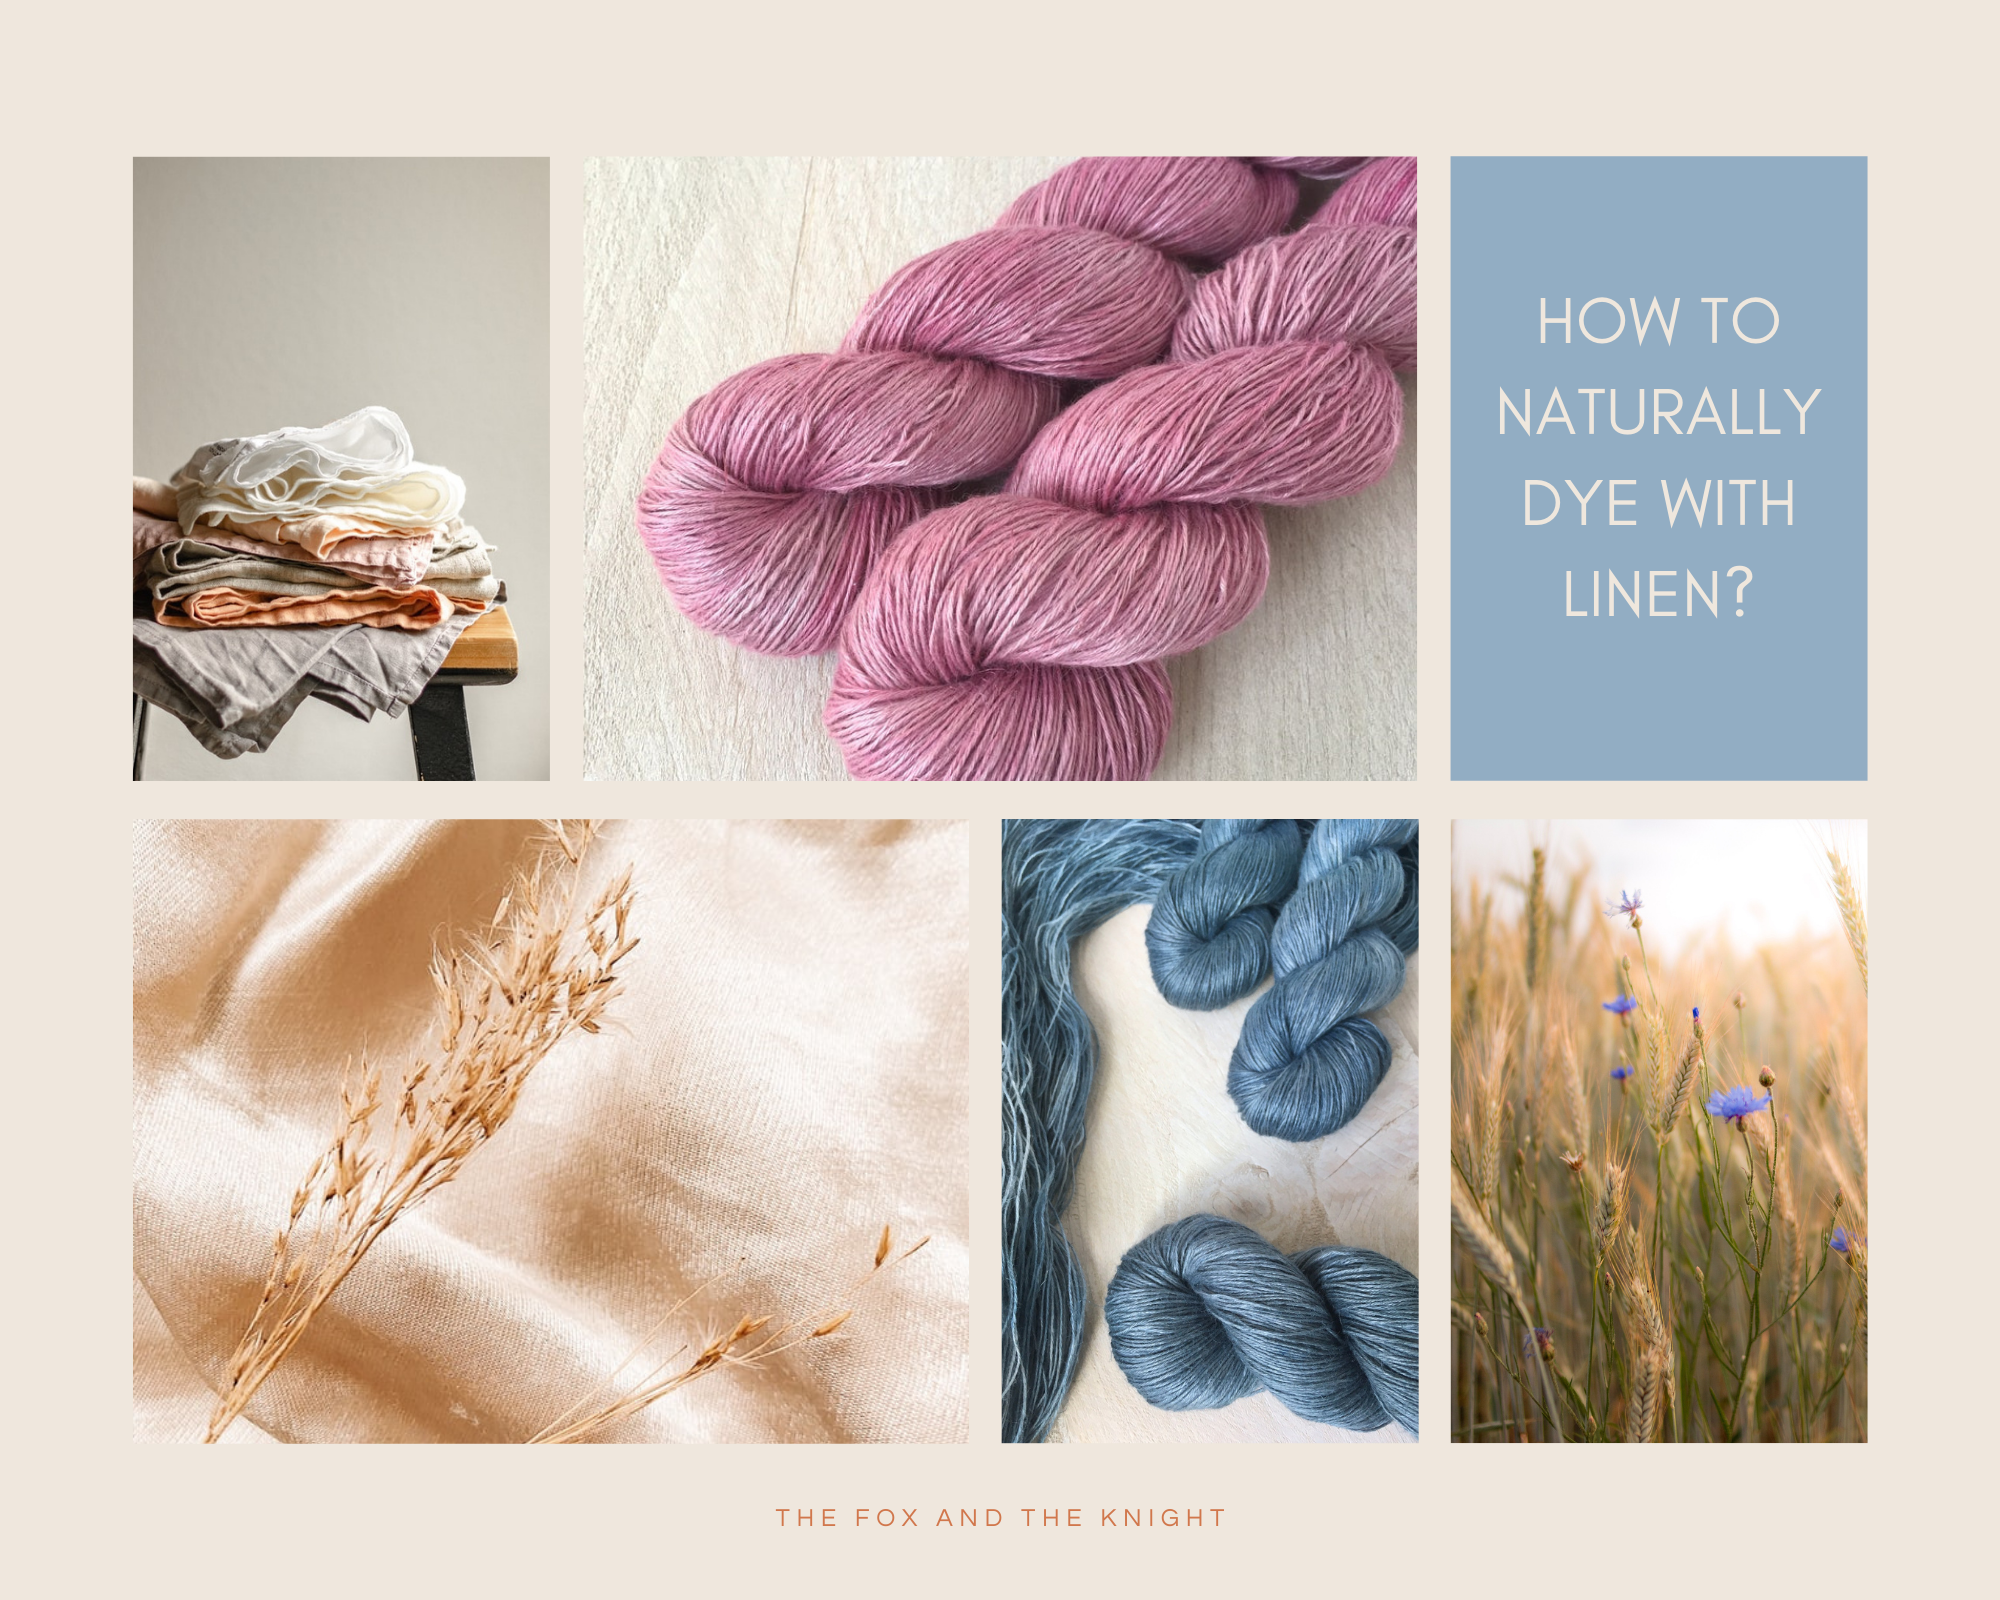 How to naturally dye with linen